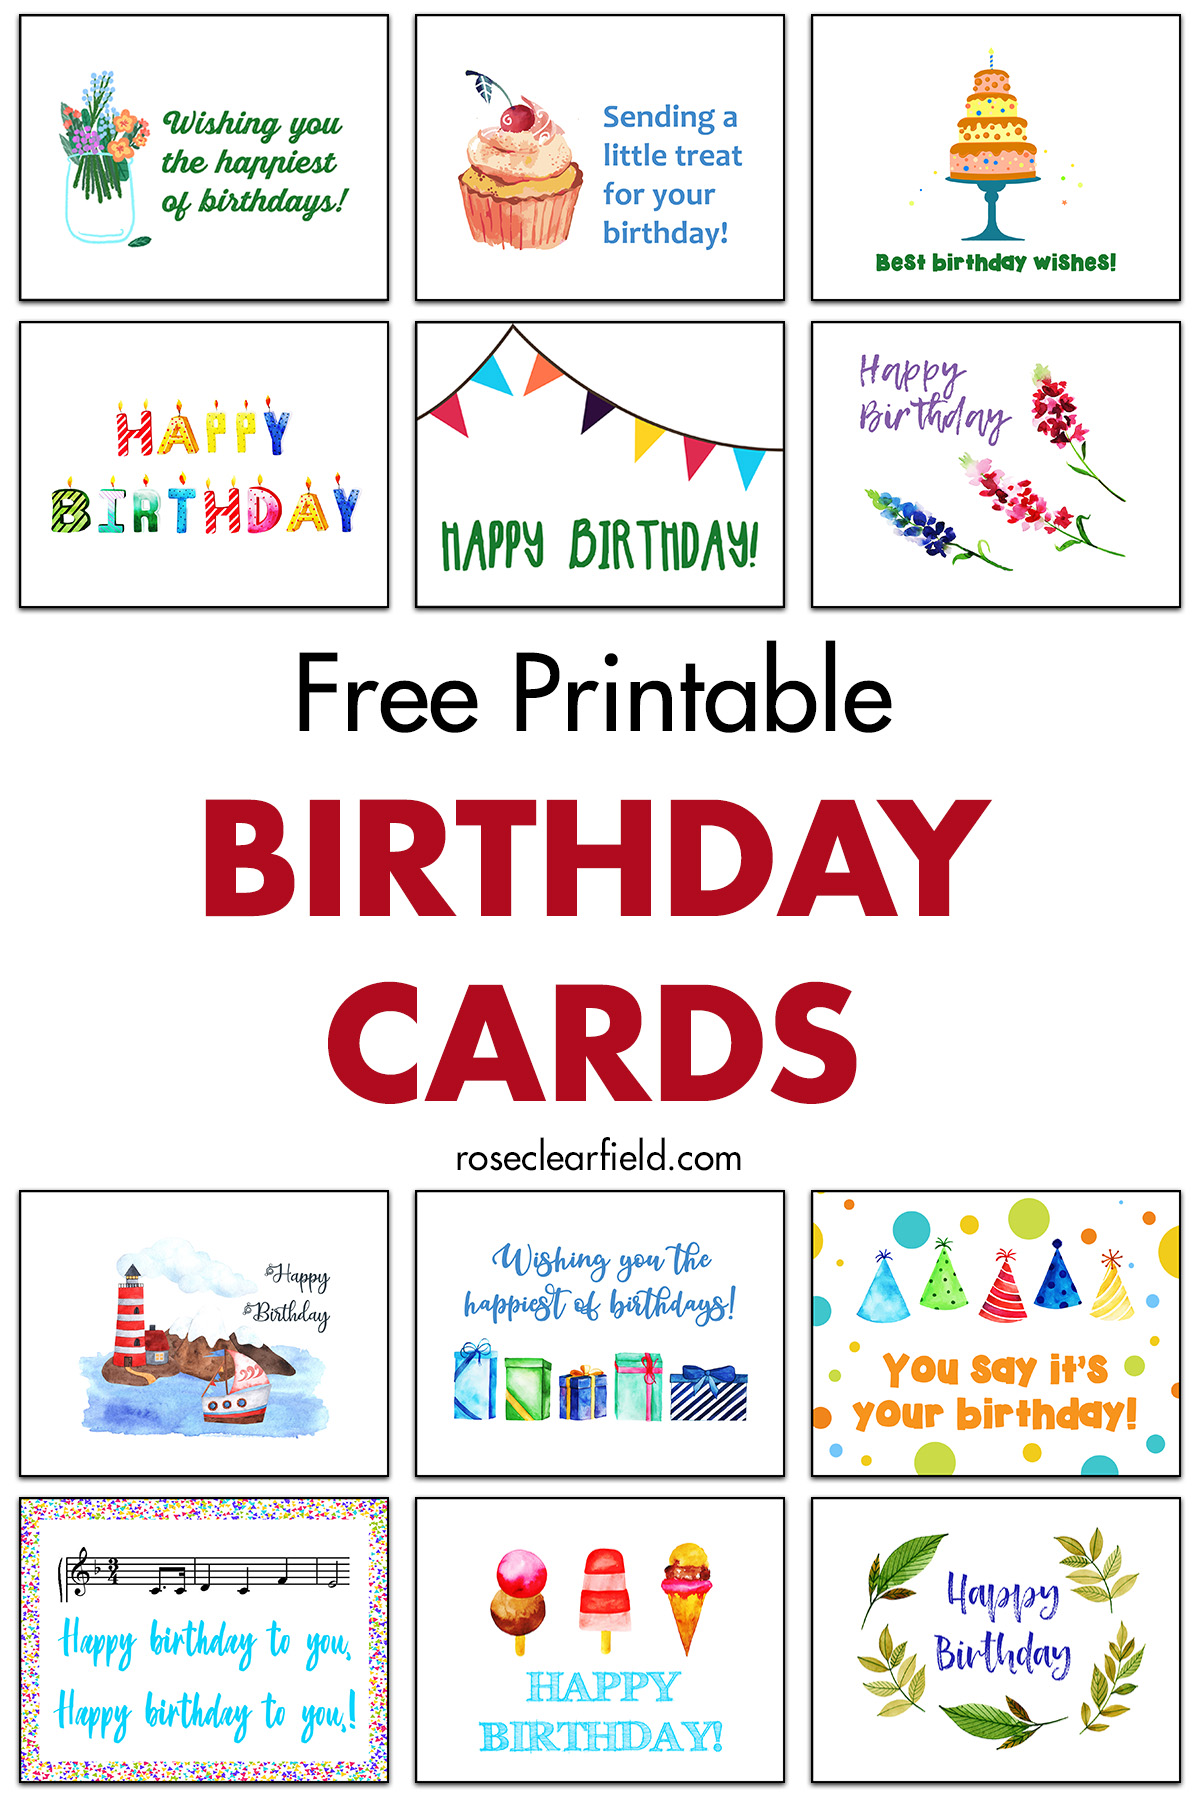 Free Printable Birthday Cards • Rose Clearfield Regarding Foldable Birthday Card Template